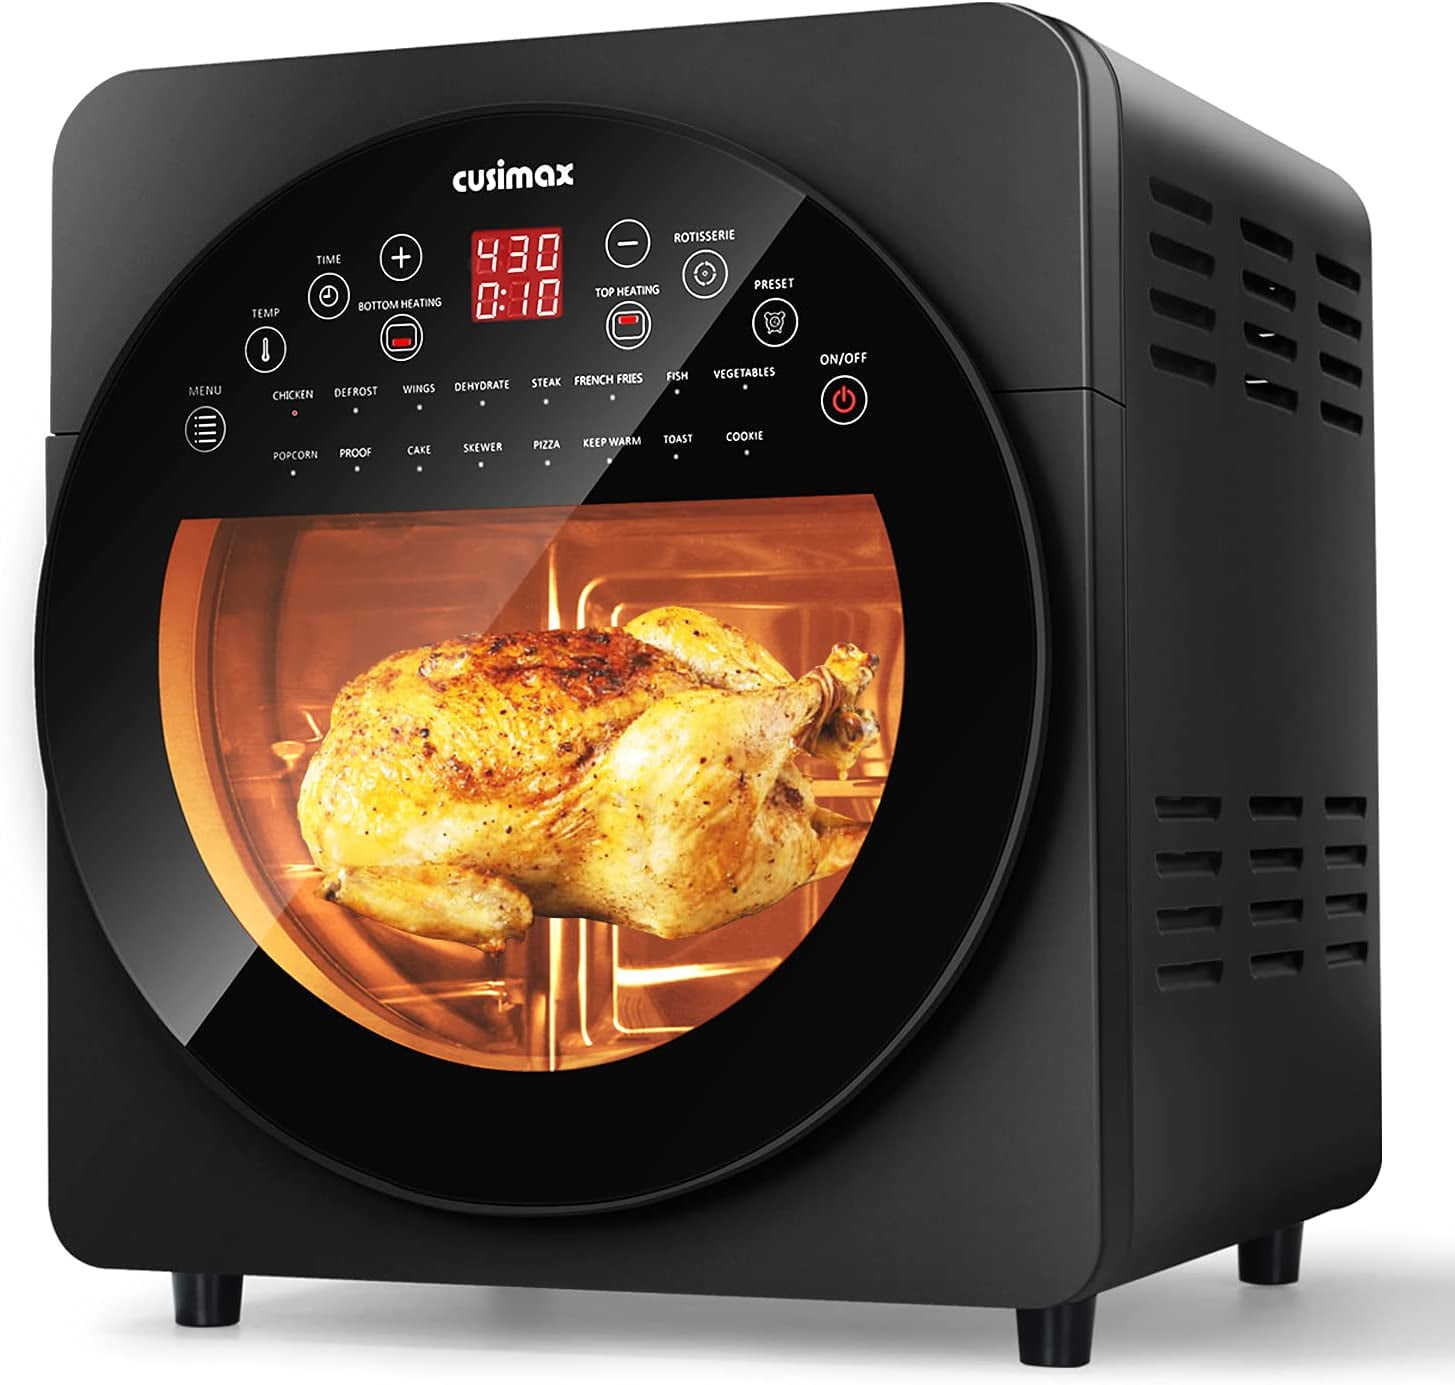 CUSIMAX CMAF-002 19 Liter Digital Air Fryer Toaster Oven 20QT 10-in-1  Multifunctional Air Fryer Oven